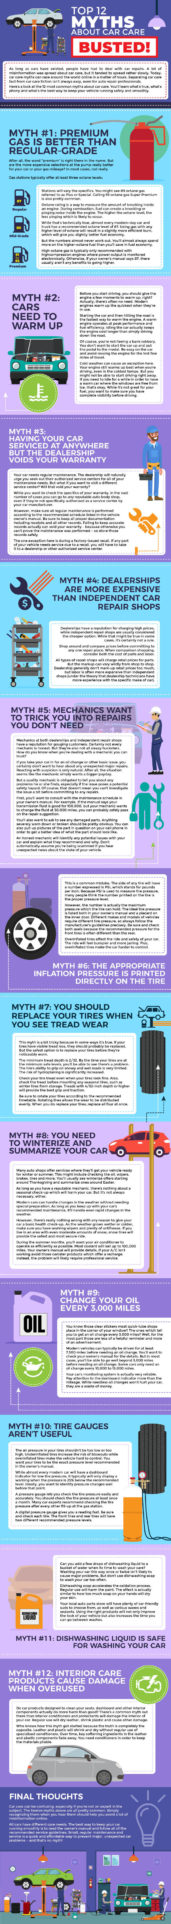 Top 12 Myths About Car Care – Busted!